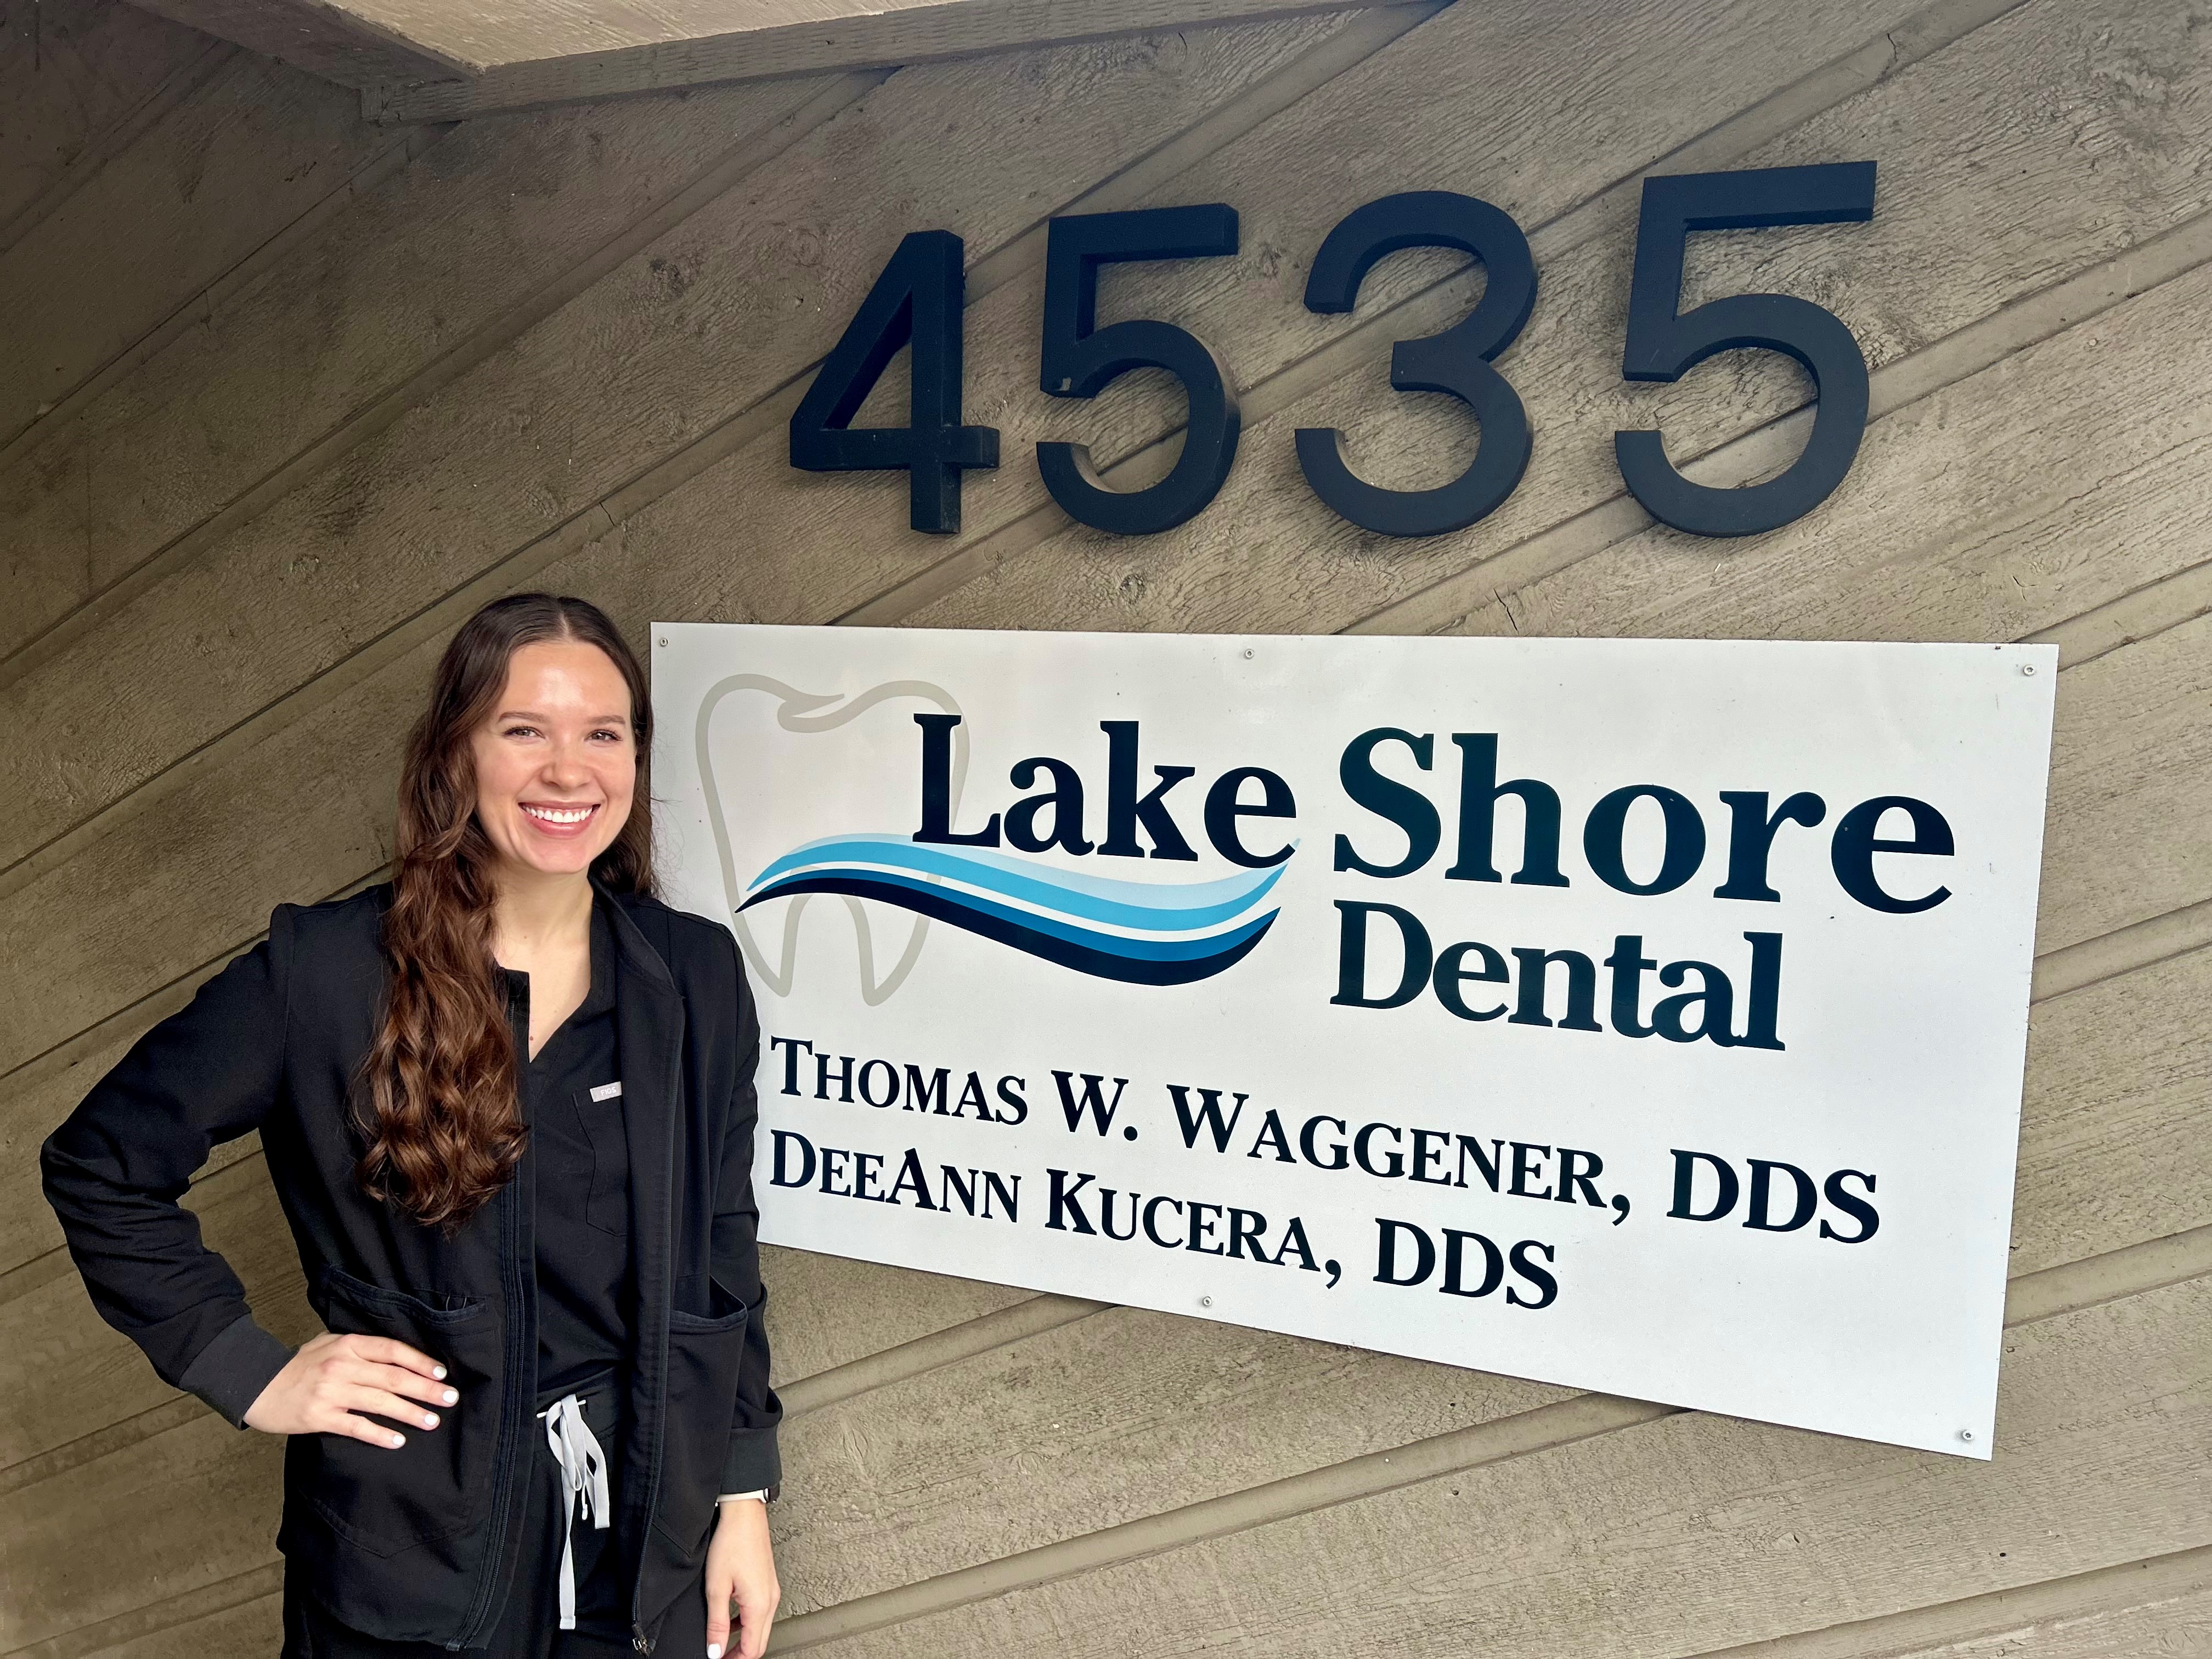 Lake Shore Dental 
4535 Lake Shore Dr, 
Waco, TX 76710
(254) 776-7622
https://lakeshoredentalwaco.com

Our Waco dentists Dr. Allsbrook, Dr. Kucera, & Dr. Waggener proudly offer compassionate, high-quality dental care for our local community. We offer general dentistry, restorative dentistry, and cosmetic dentistry. Call us to schedule an appointment today!